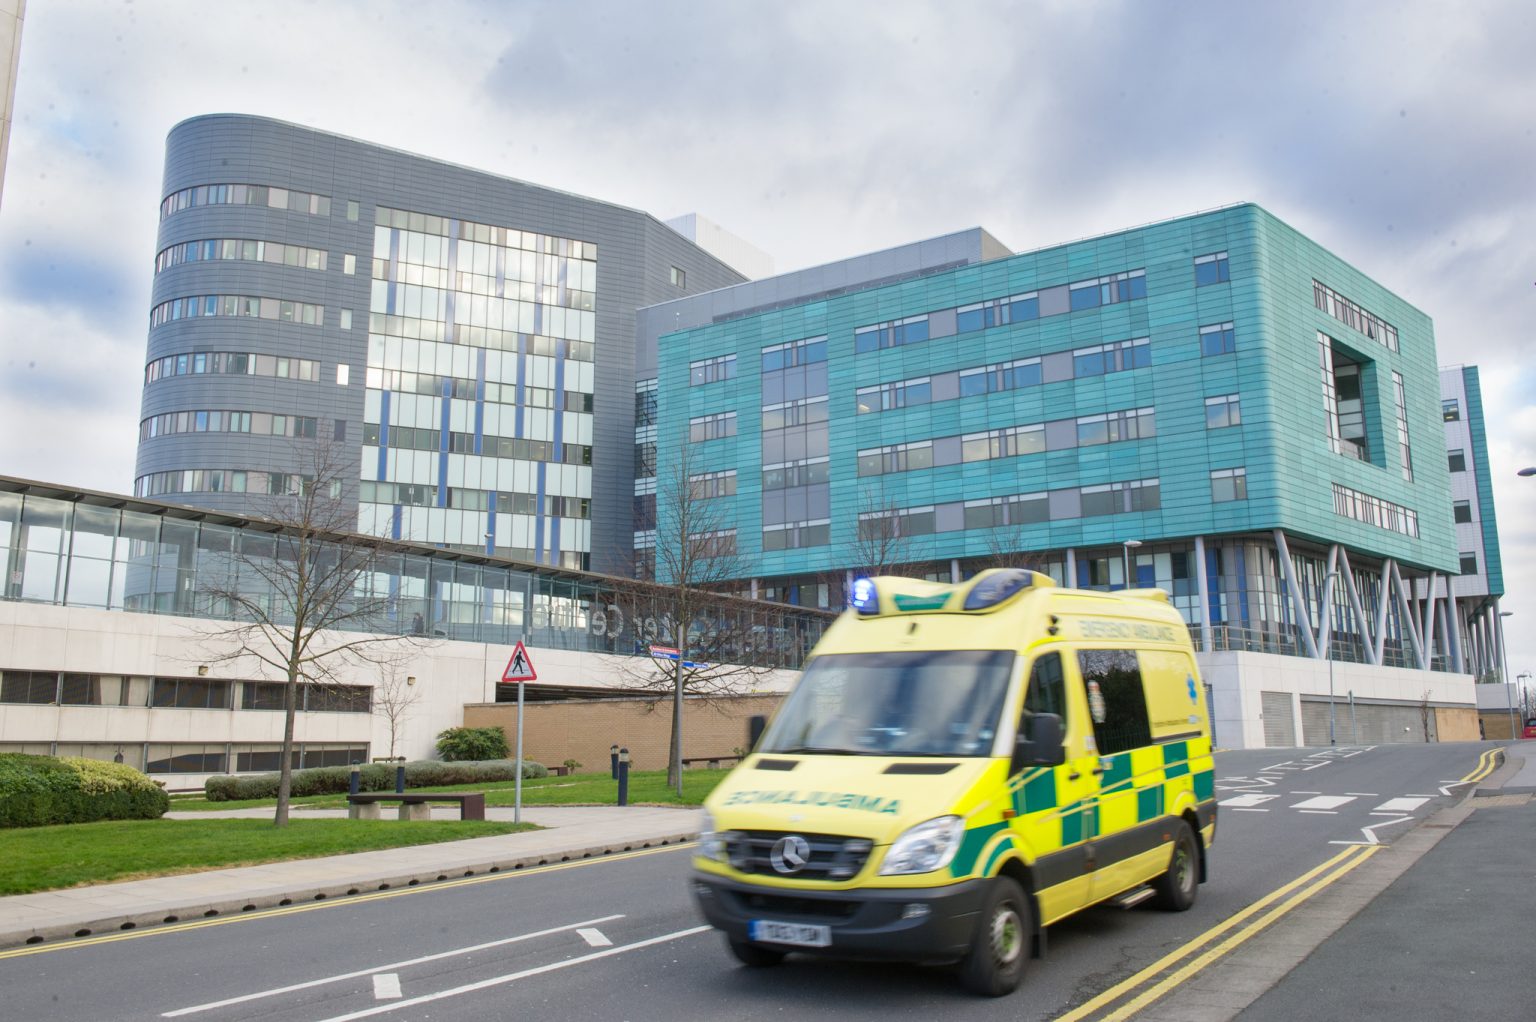 One Of The Uks Largest Nhs Trusts Has Taken ‘massive Steps Forward With Microsoft Azure 6639